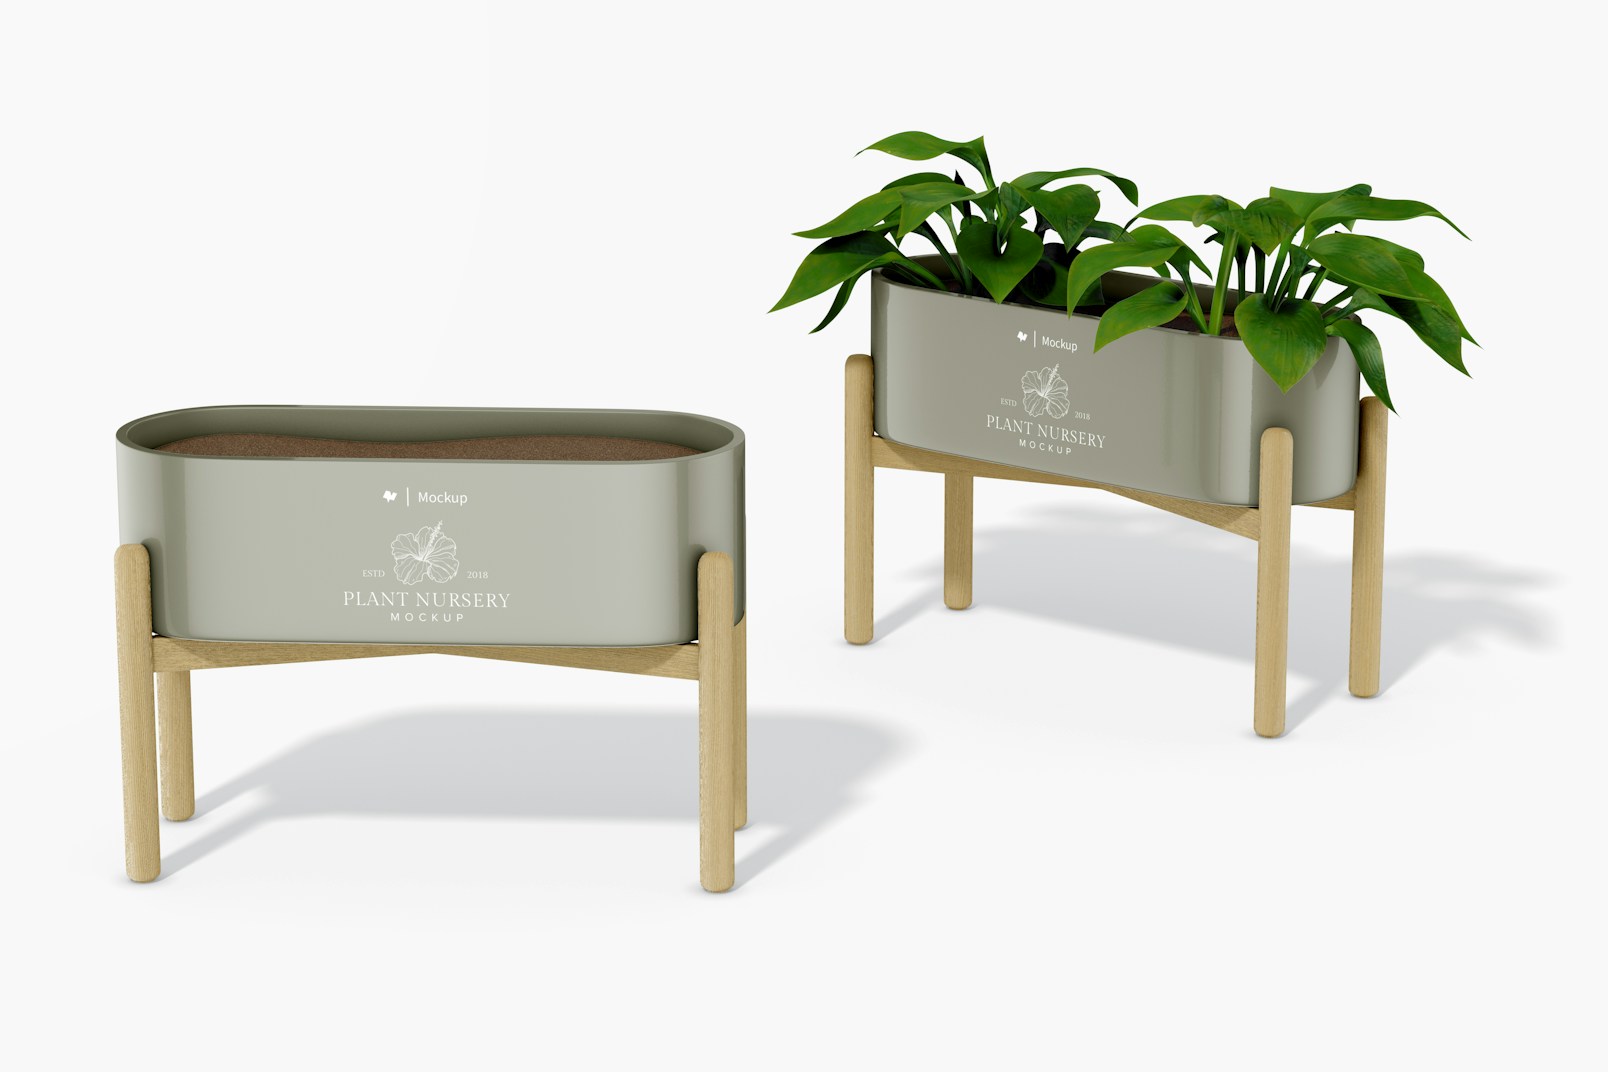 Ceramic Pots with Stand Mockup